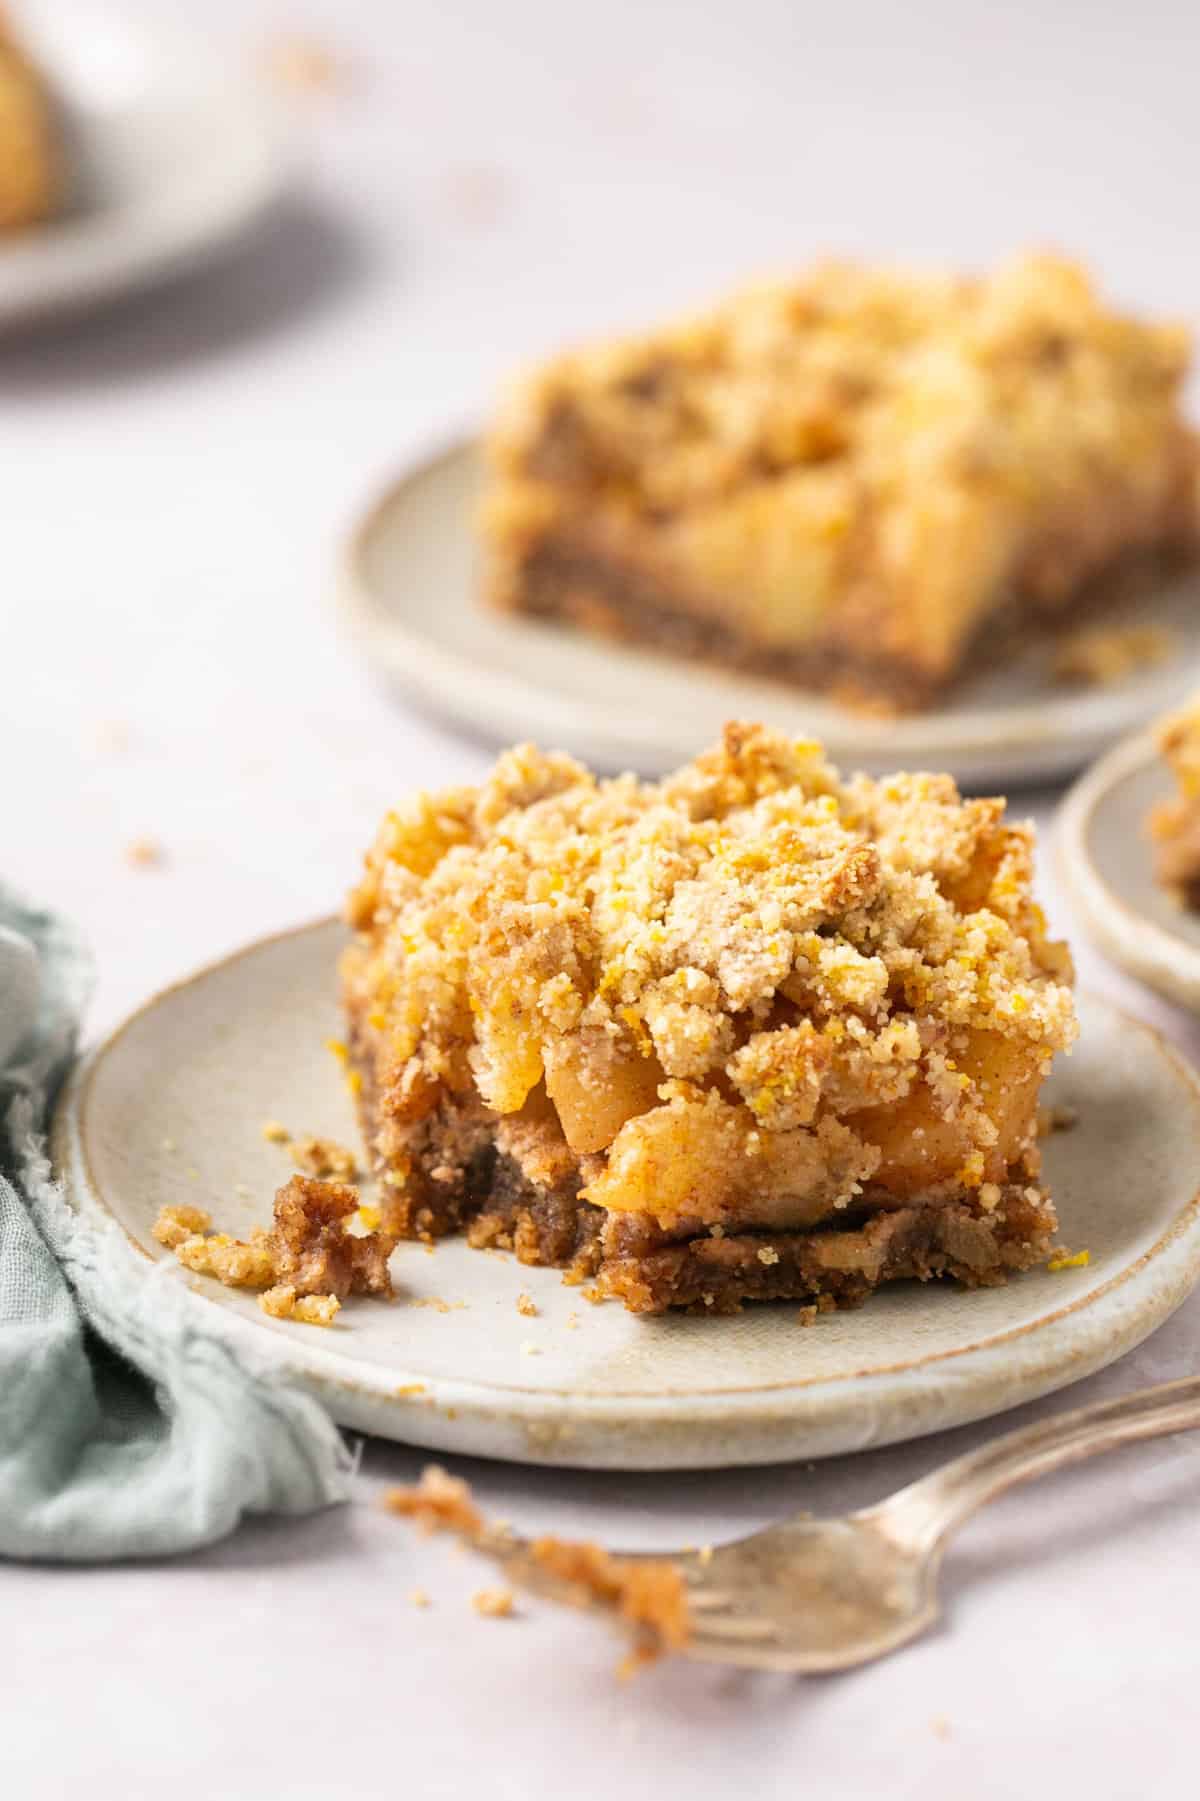 An apple crumble bar on a plate with a bite out of it.